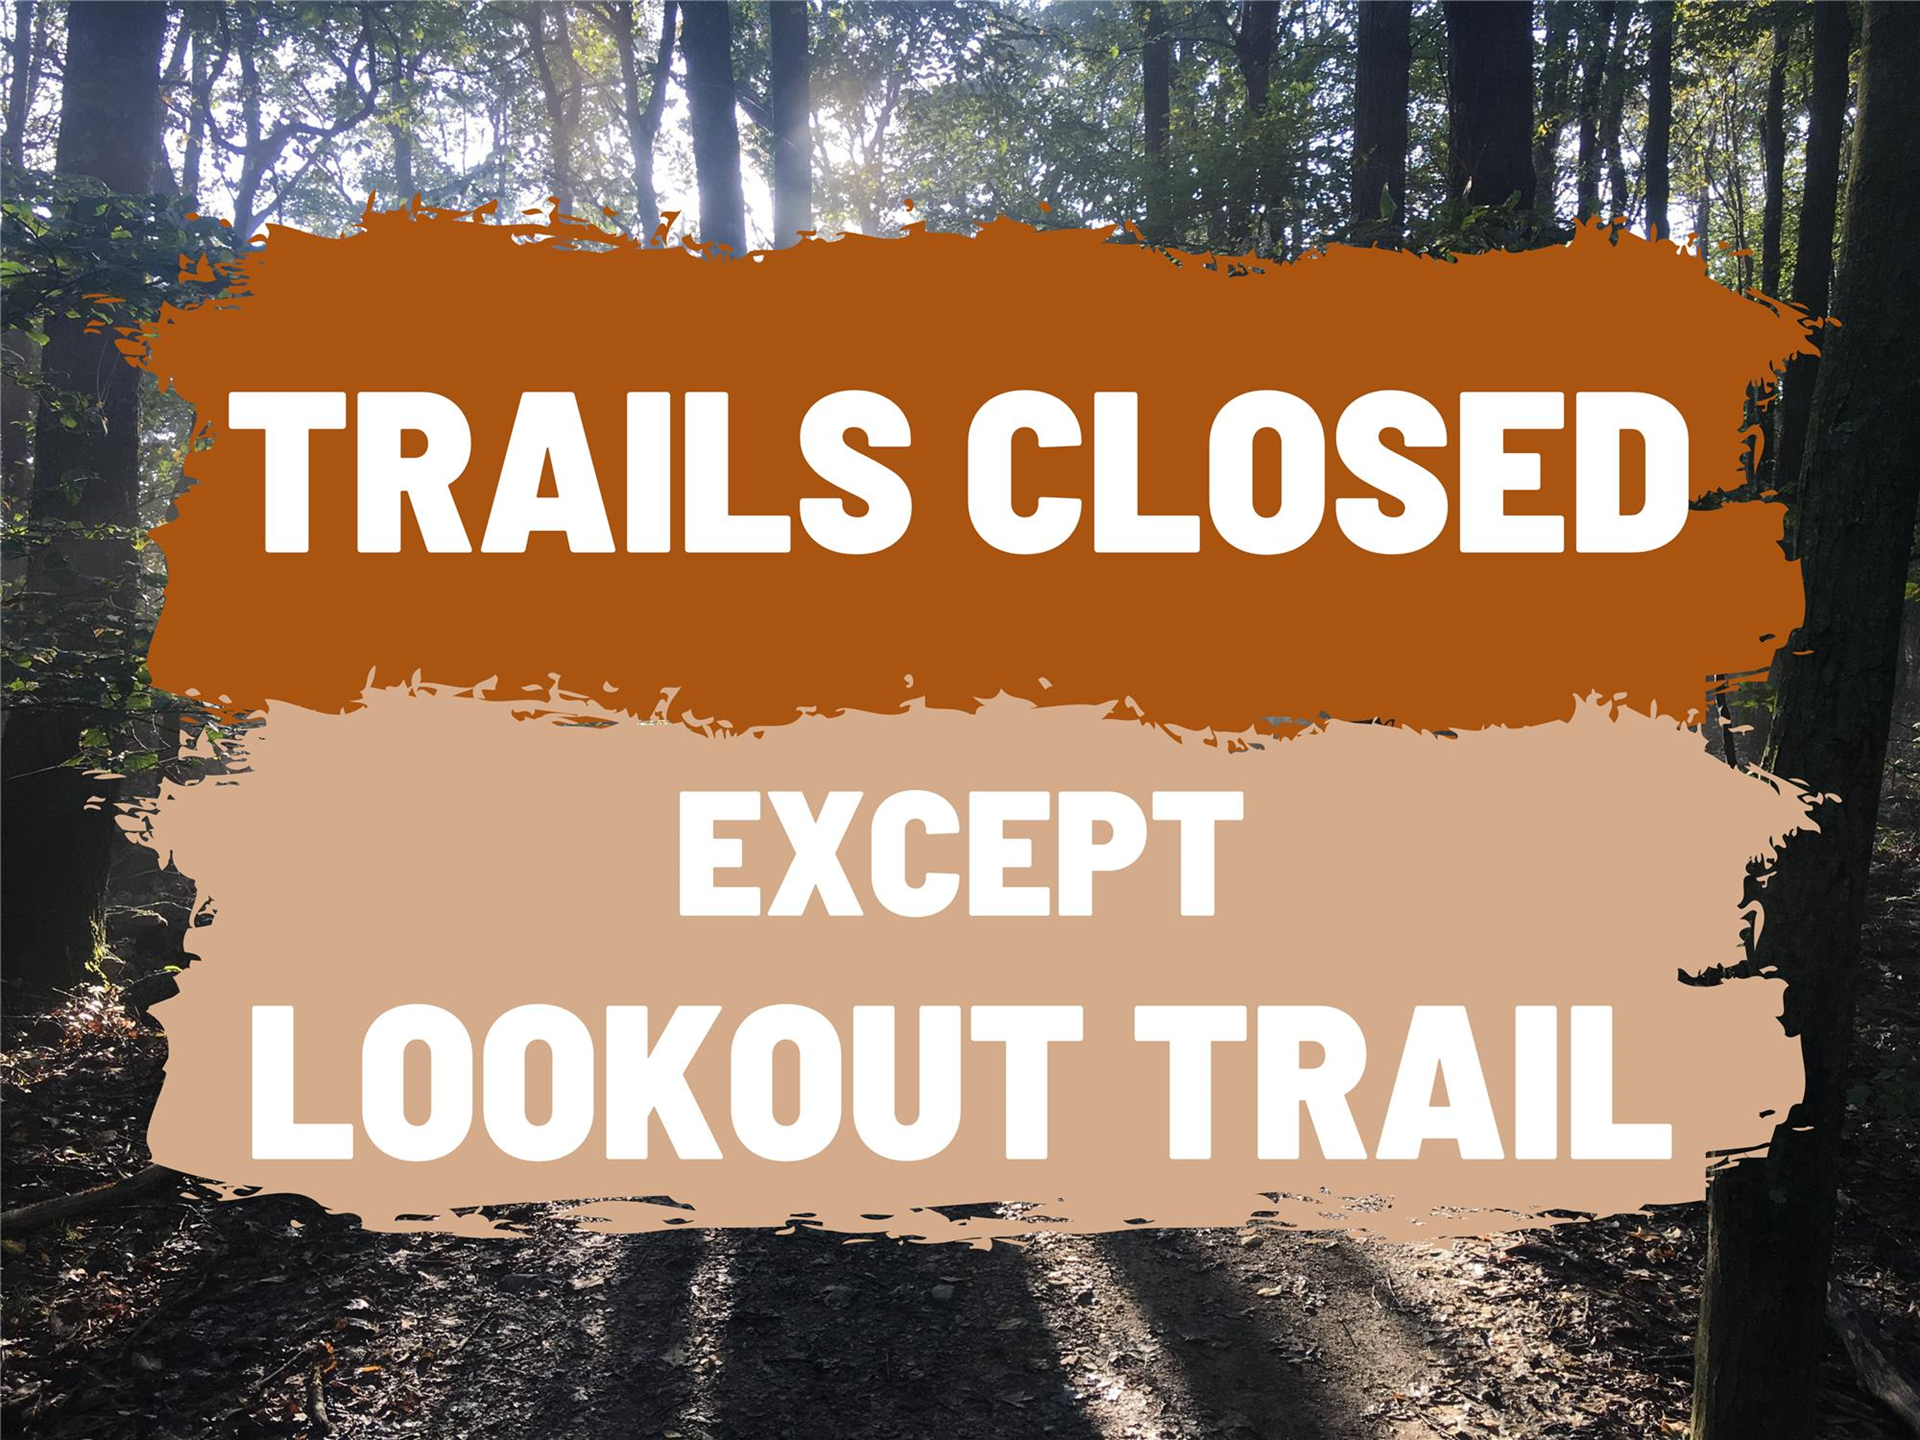 ALL TRAILS CLOSED except Lookout Trail